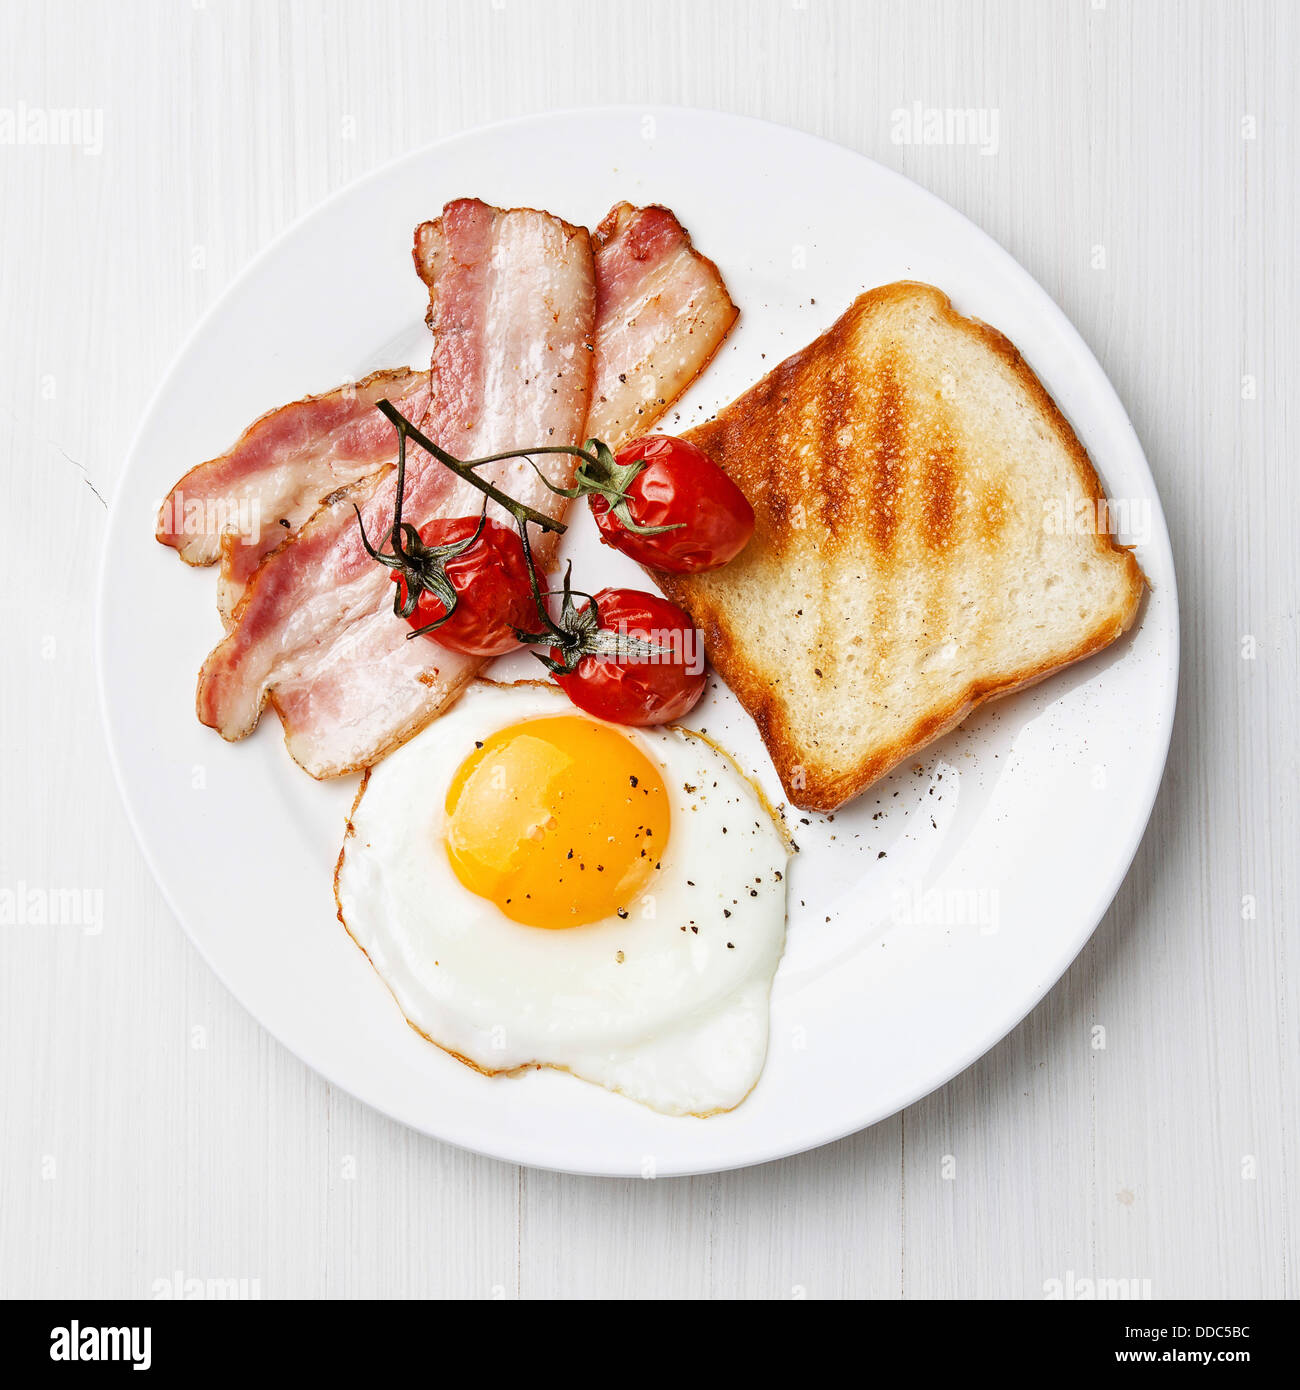 Breakfast with Fried egg and bacon on plate Stock Photo